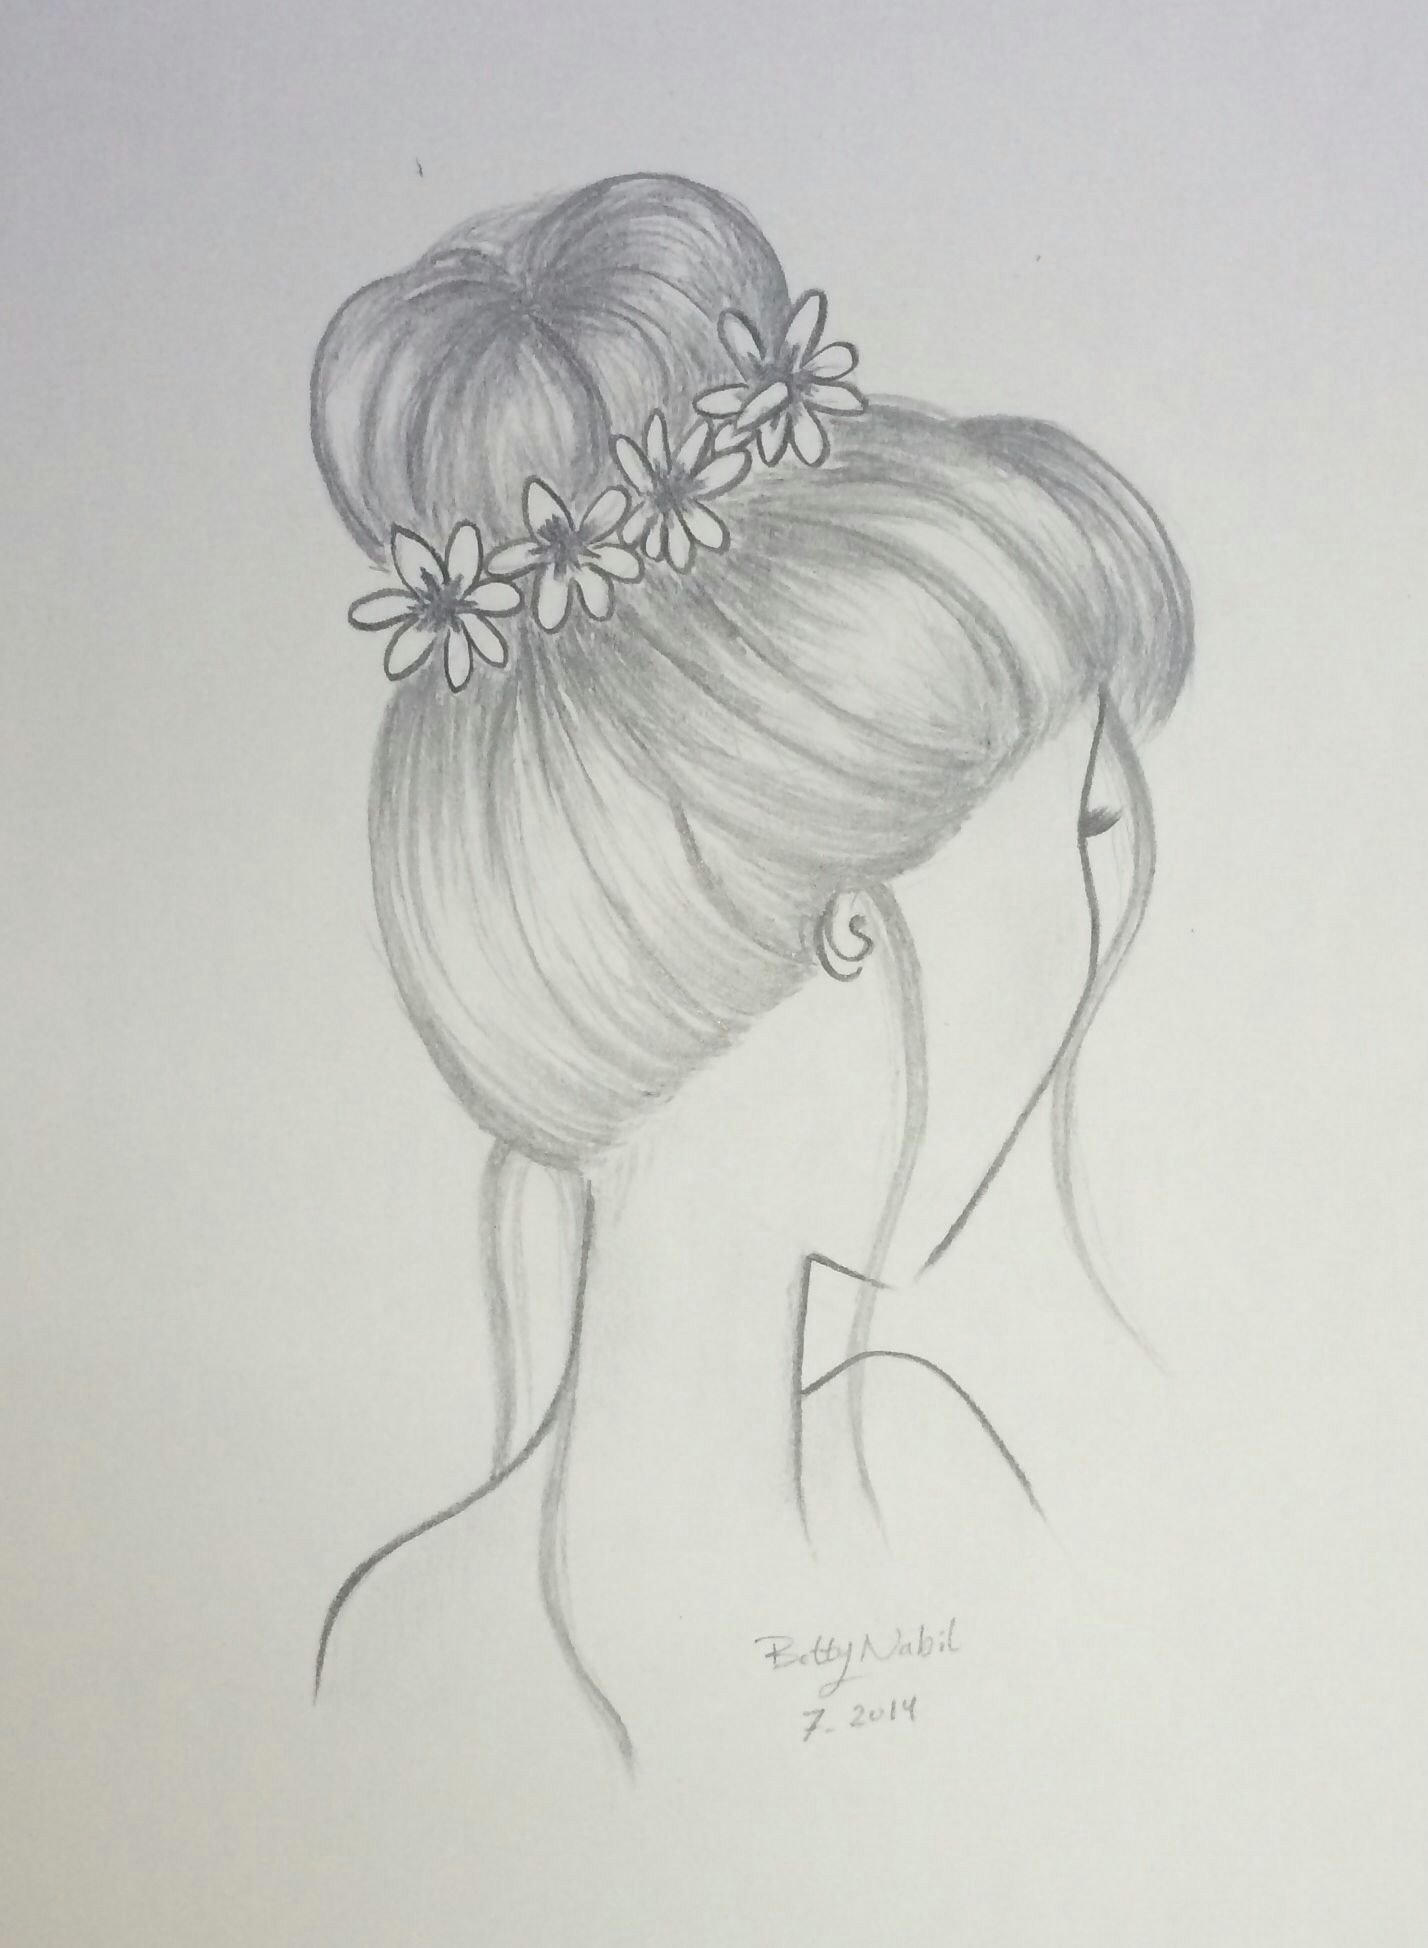 Drawing Girl with Bun Draw Hair Bun Hairstyle with Flowers Draw In 2019 Drawings